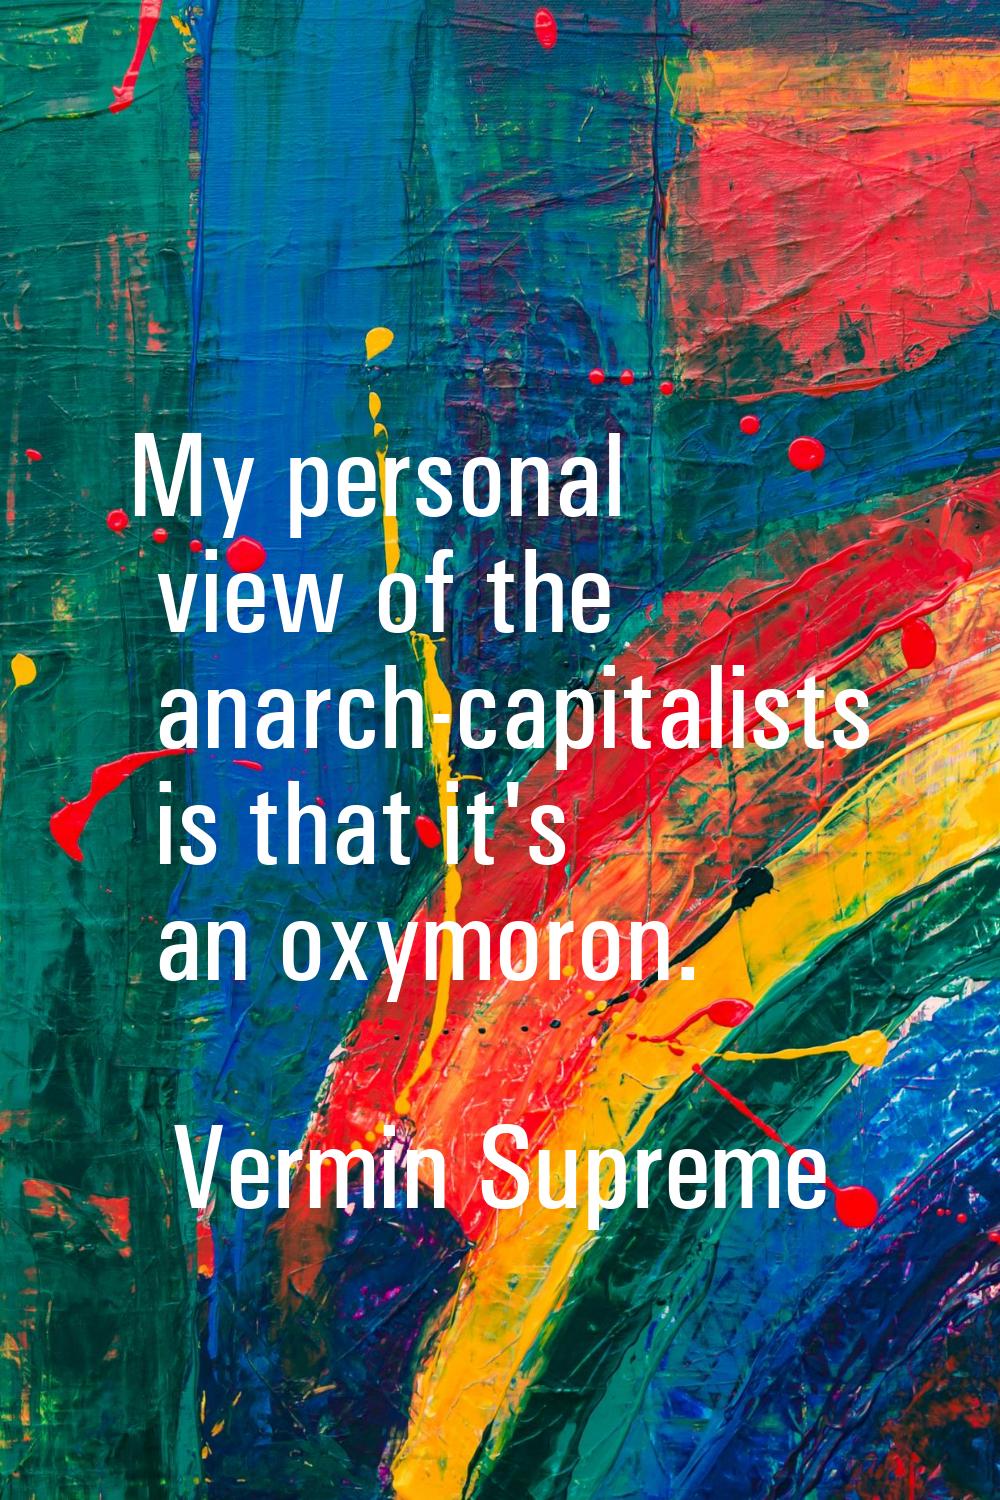 My personal view of the anarch-capitalists is that it's an oxymoron.